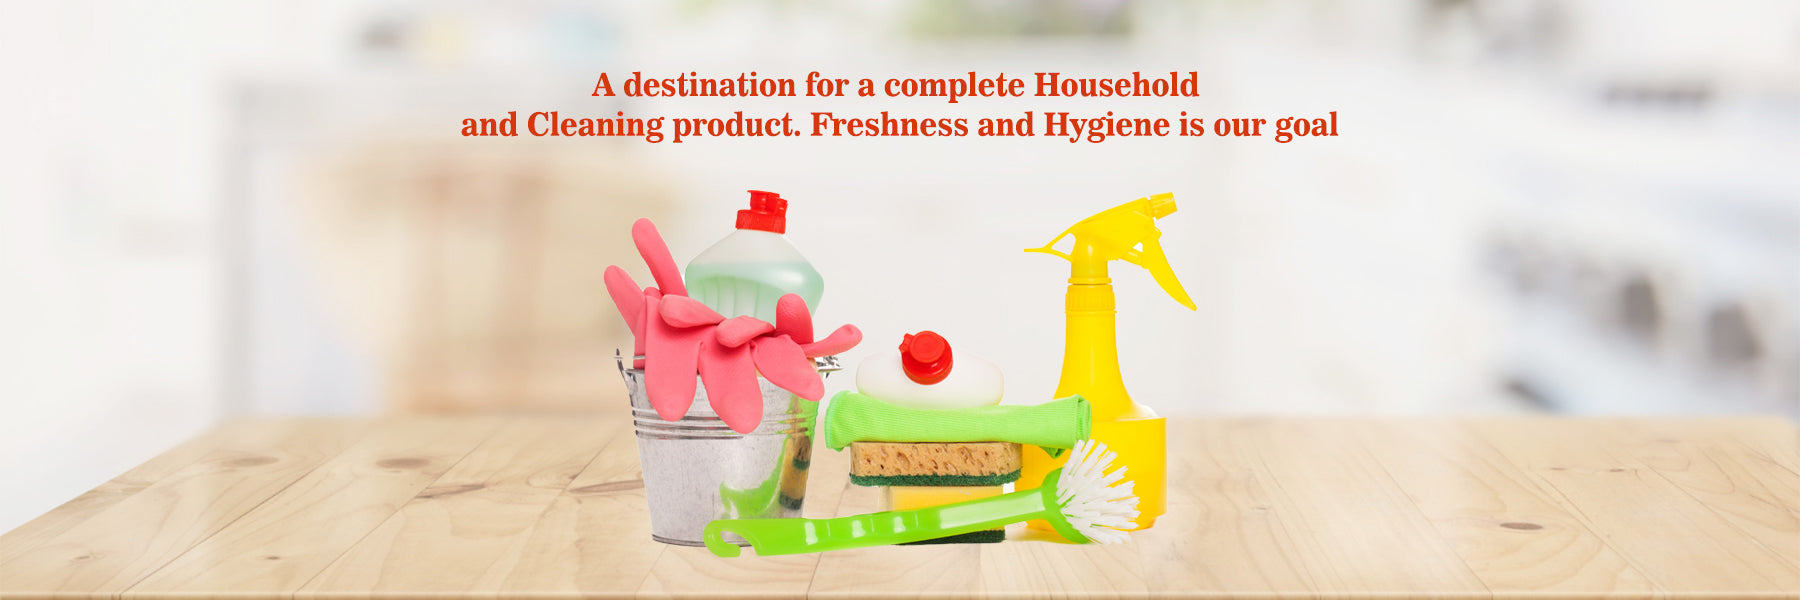 A destination for a complete Household and Cleaning product. Freshness and Hygiene is our goal FromIndia.com